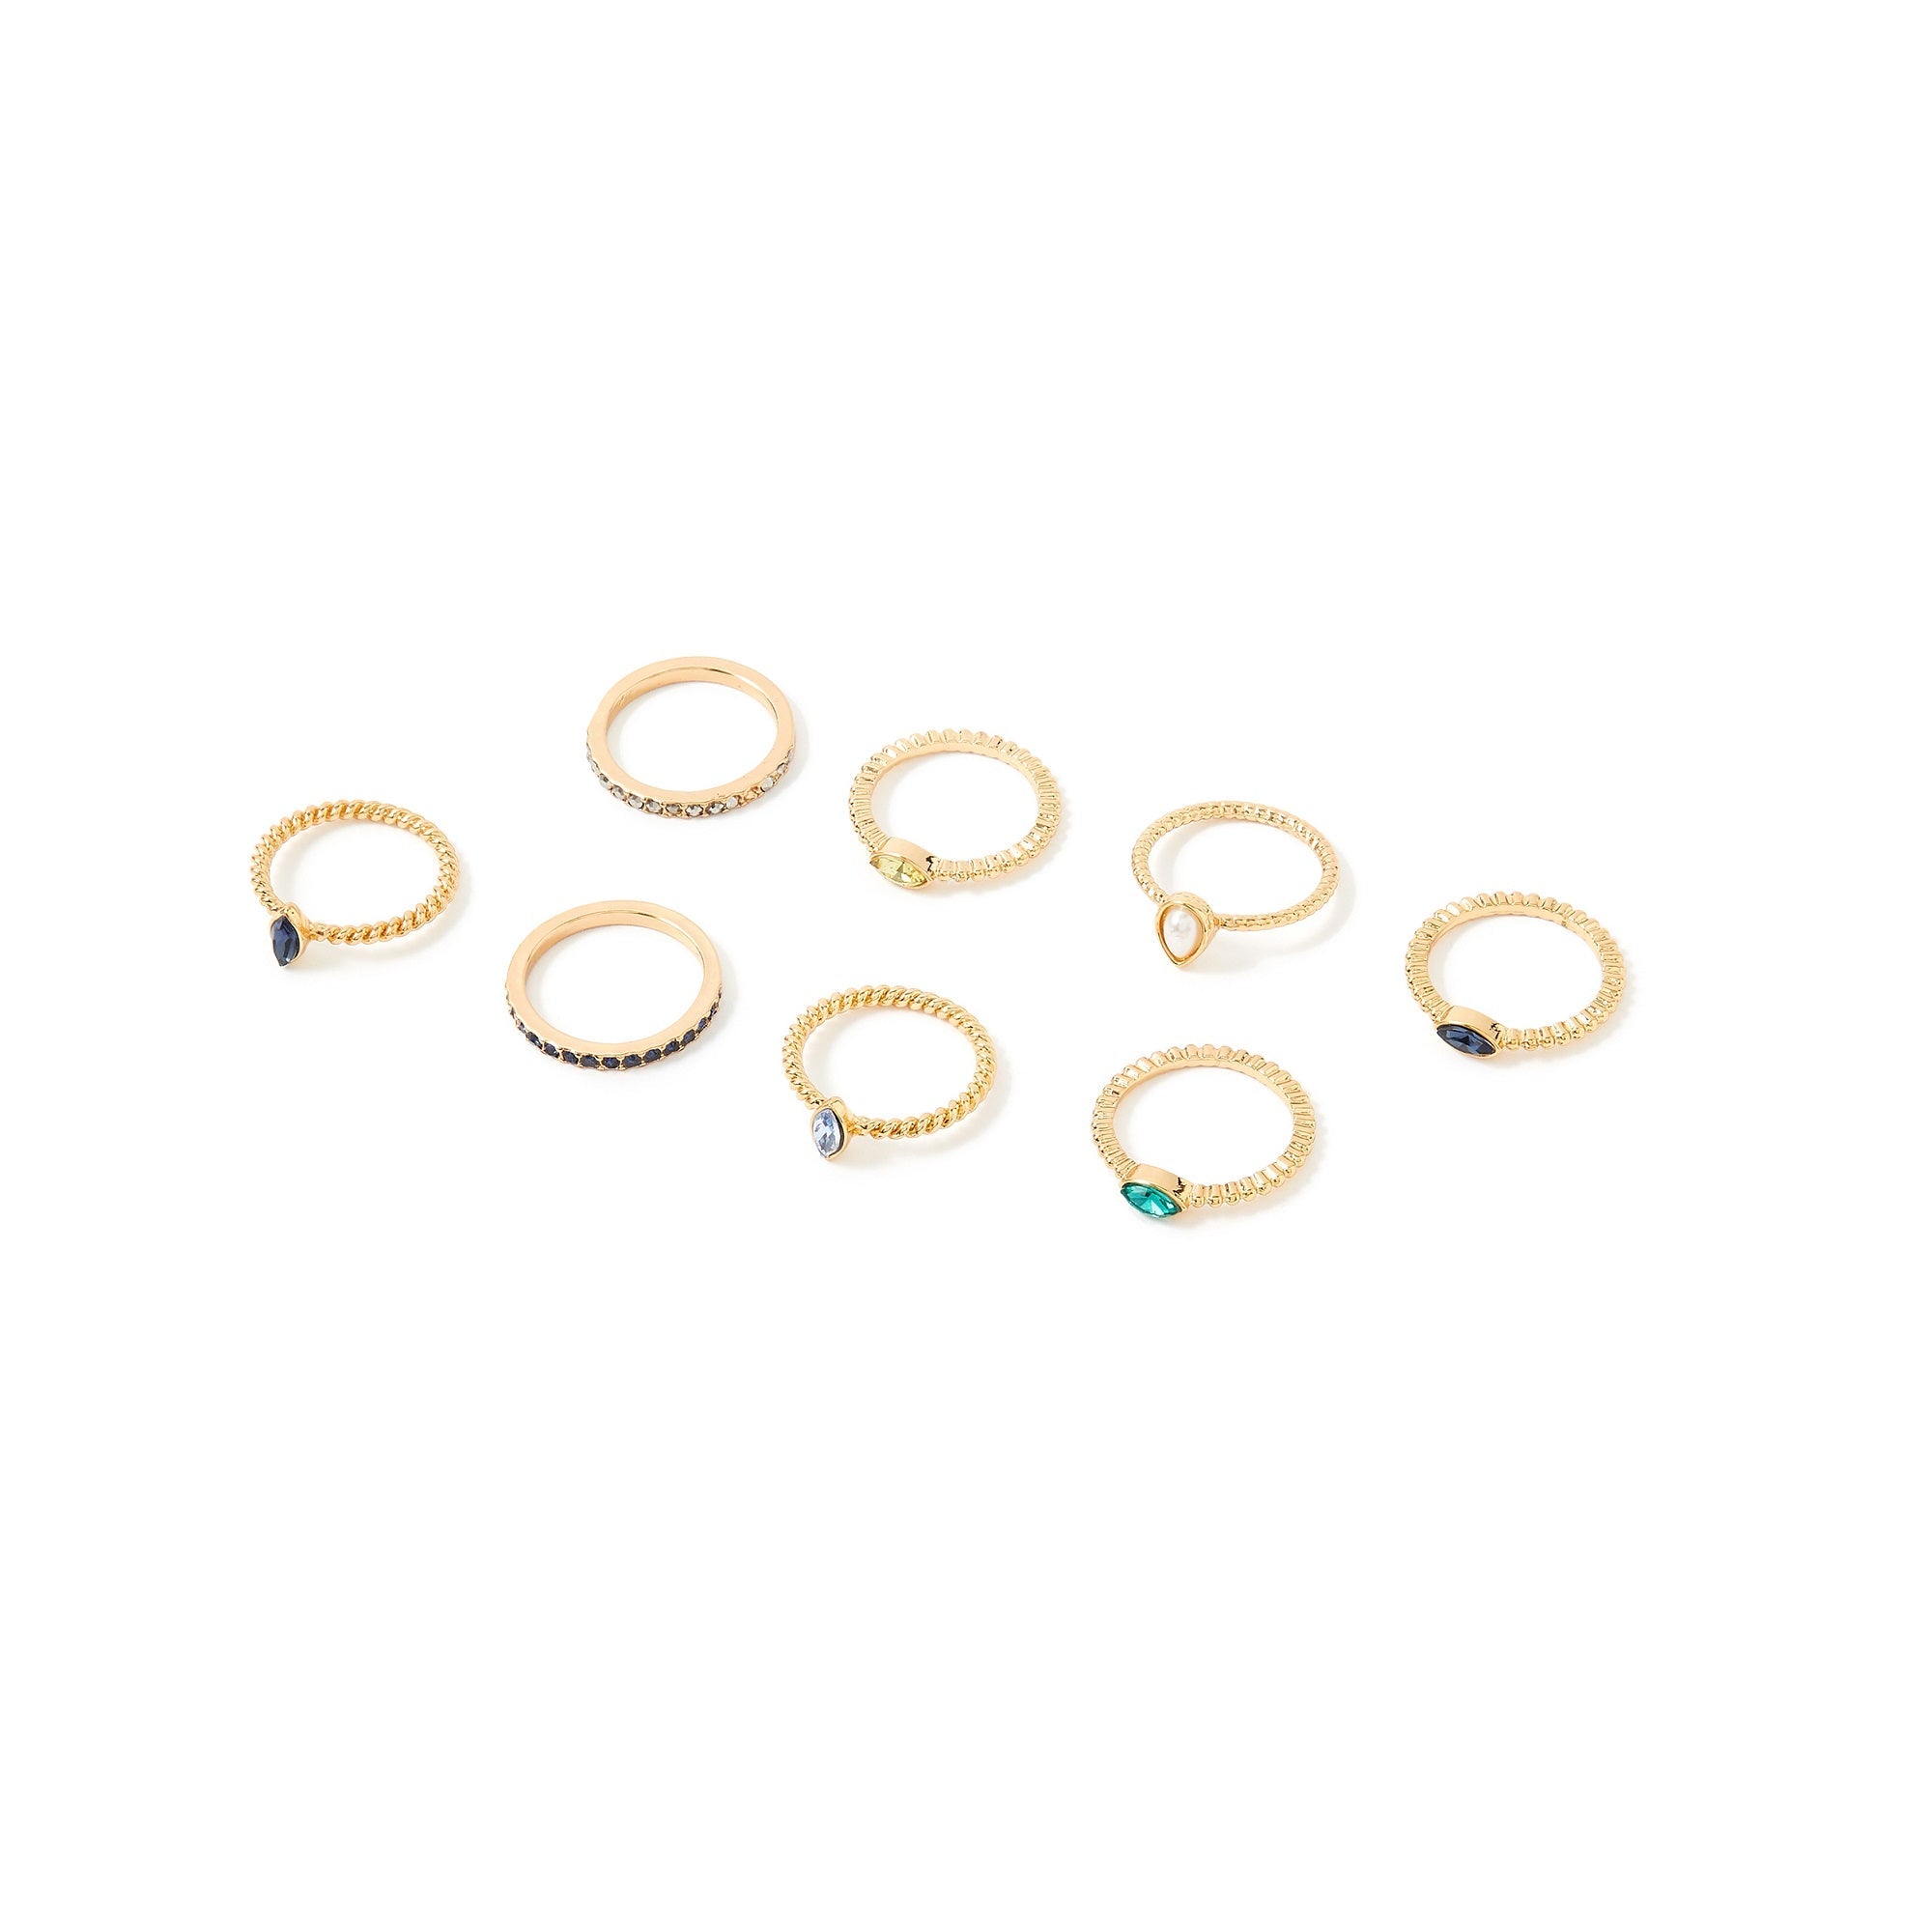 Accessorize London Women's set of 8 Blue Harvest Gems Stacking ring pack